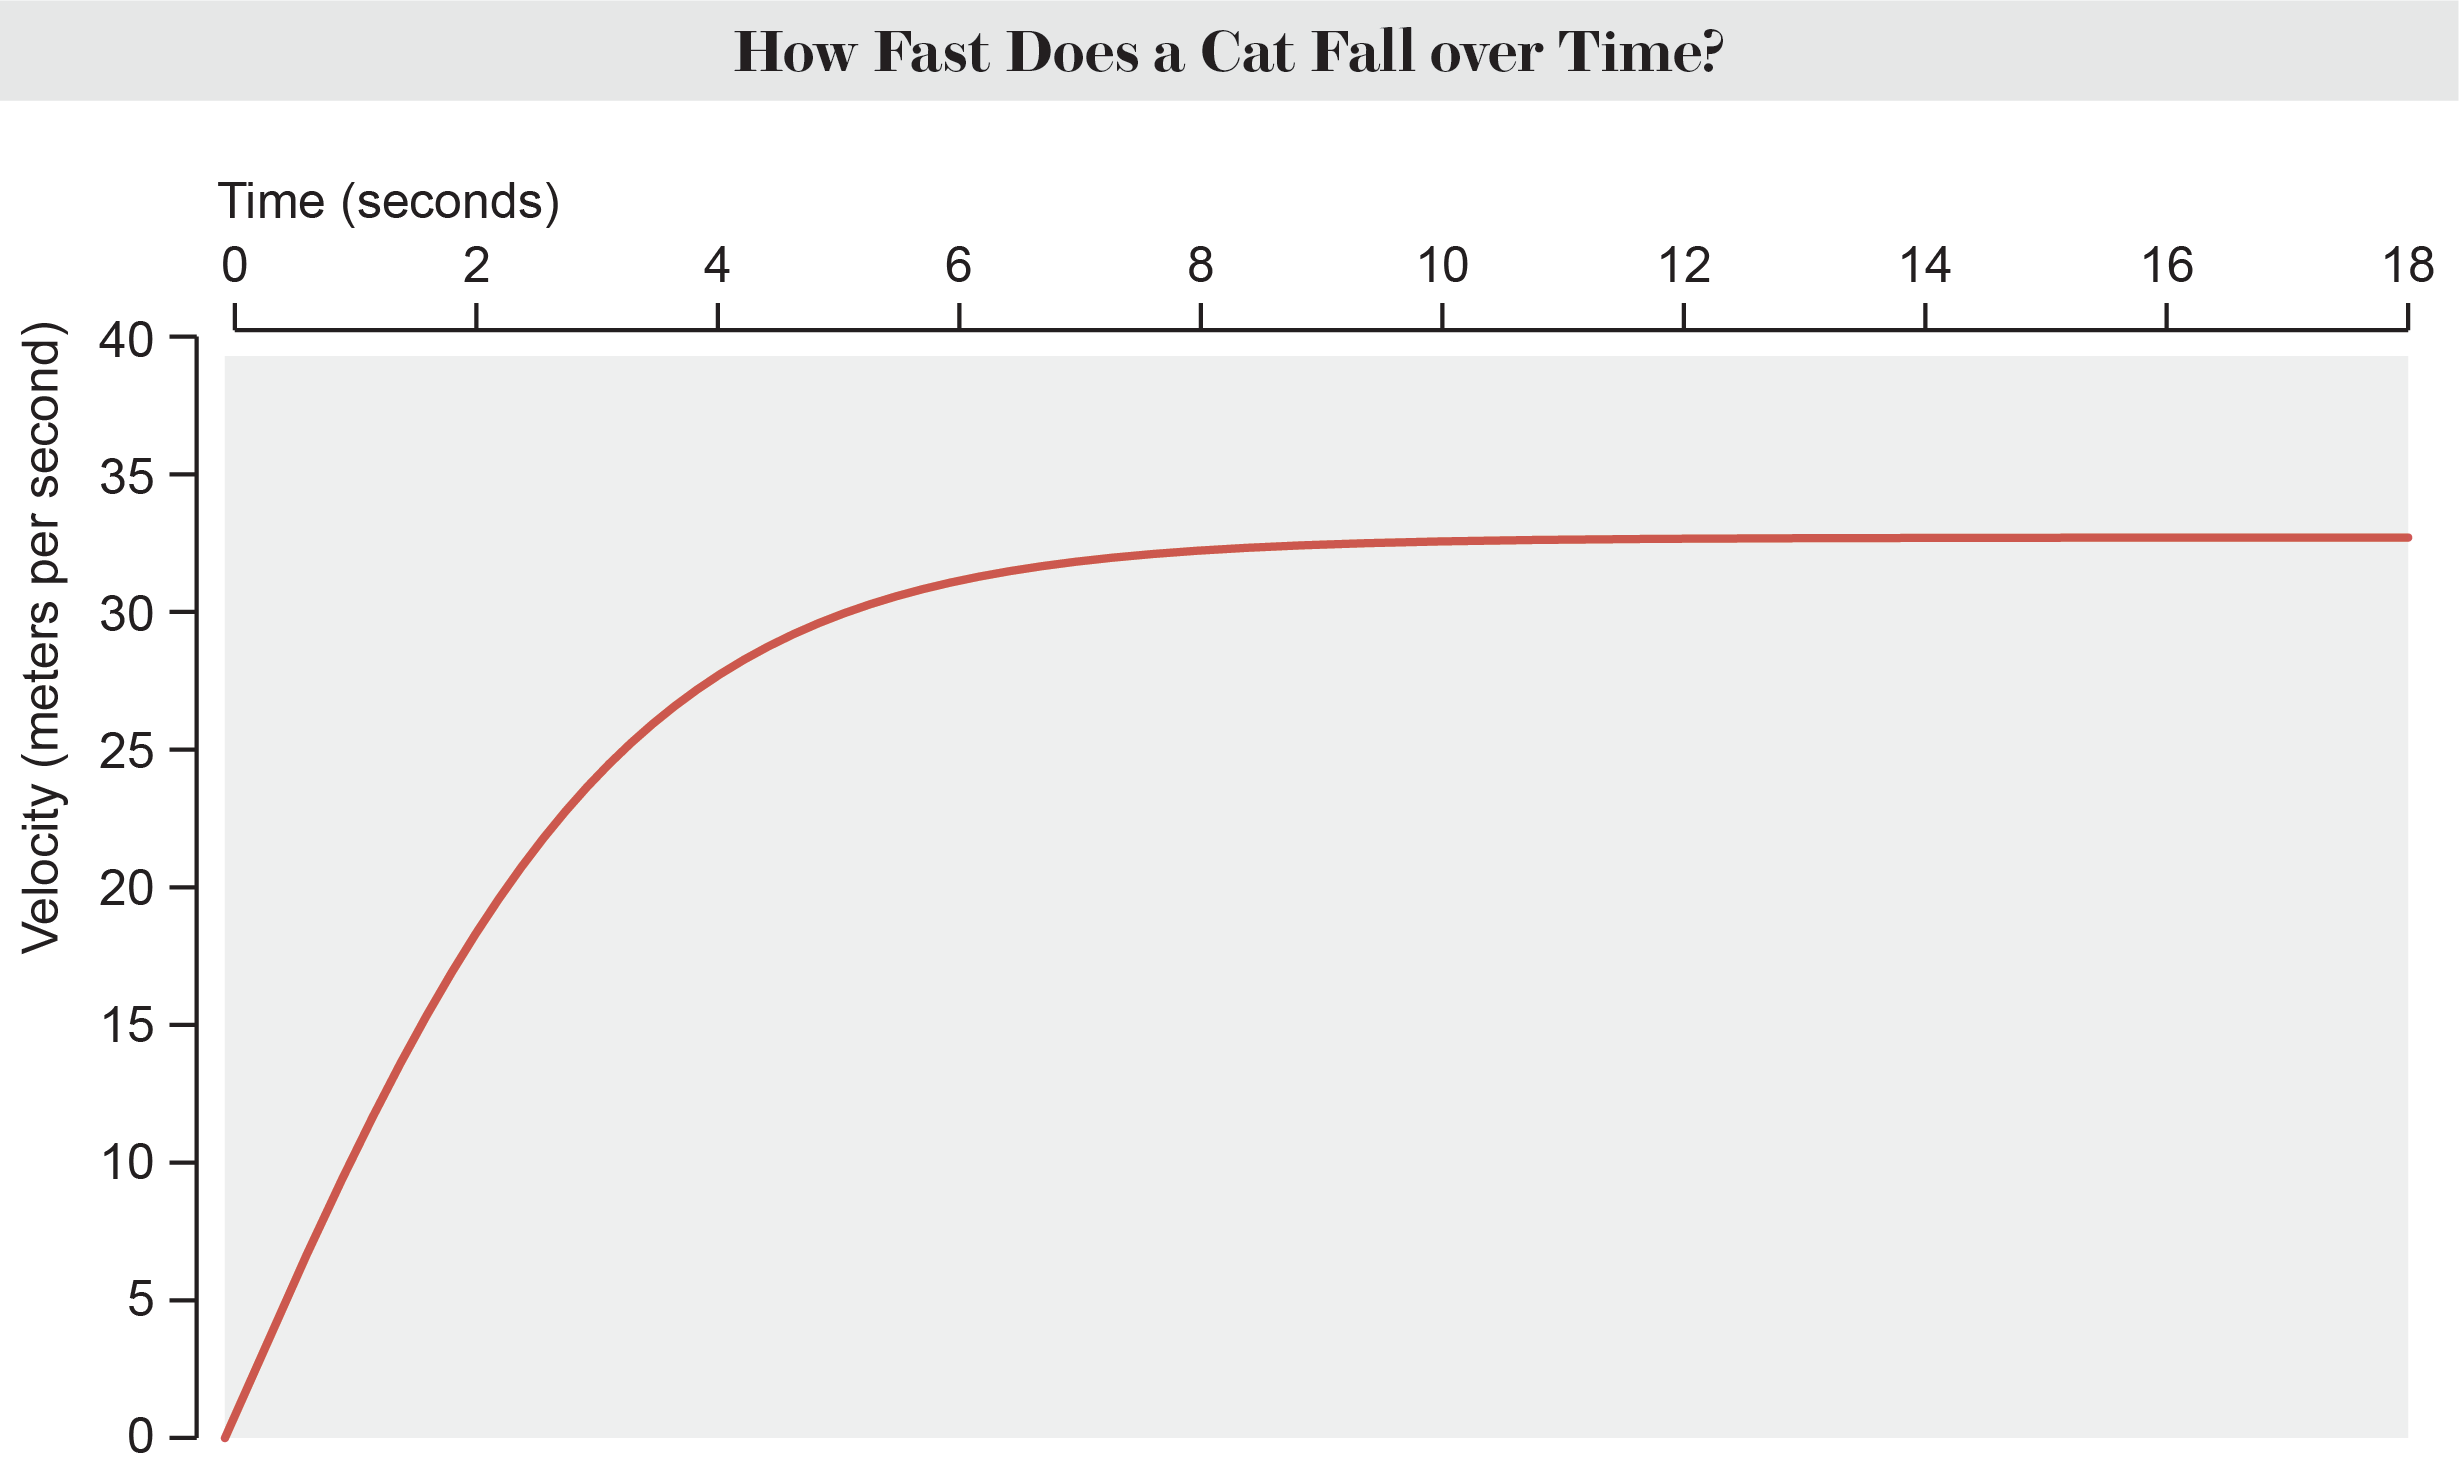 Figure charts a cat’s speed over time.